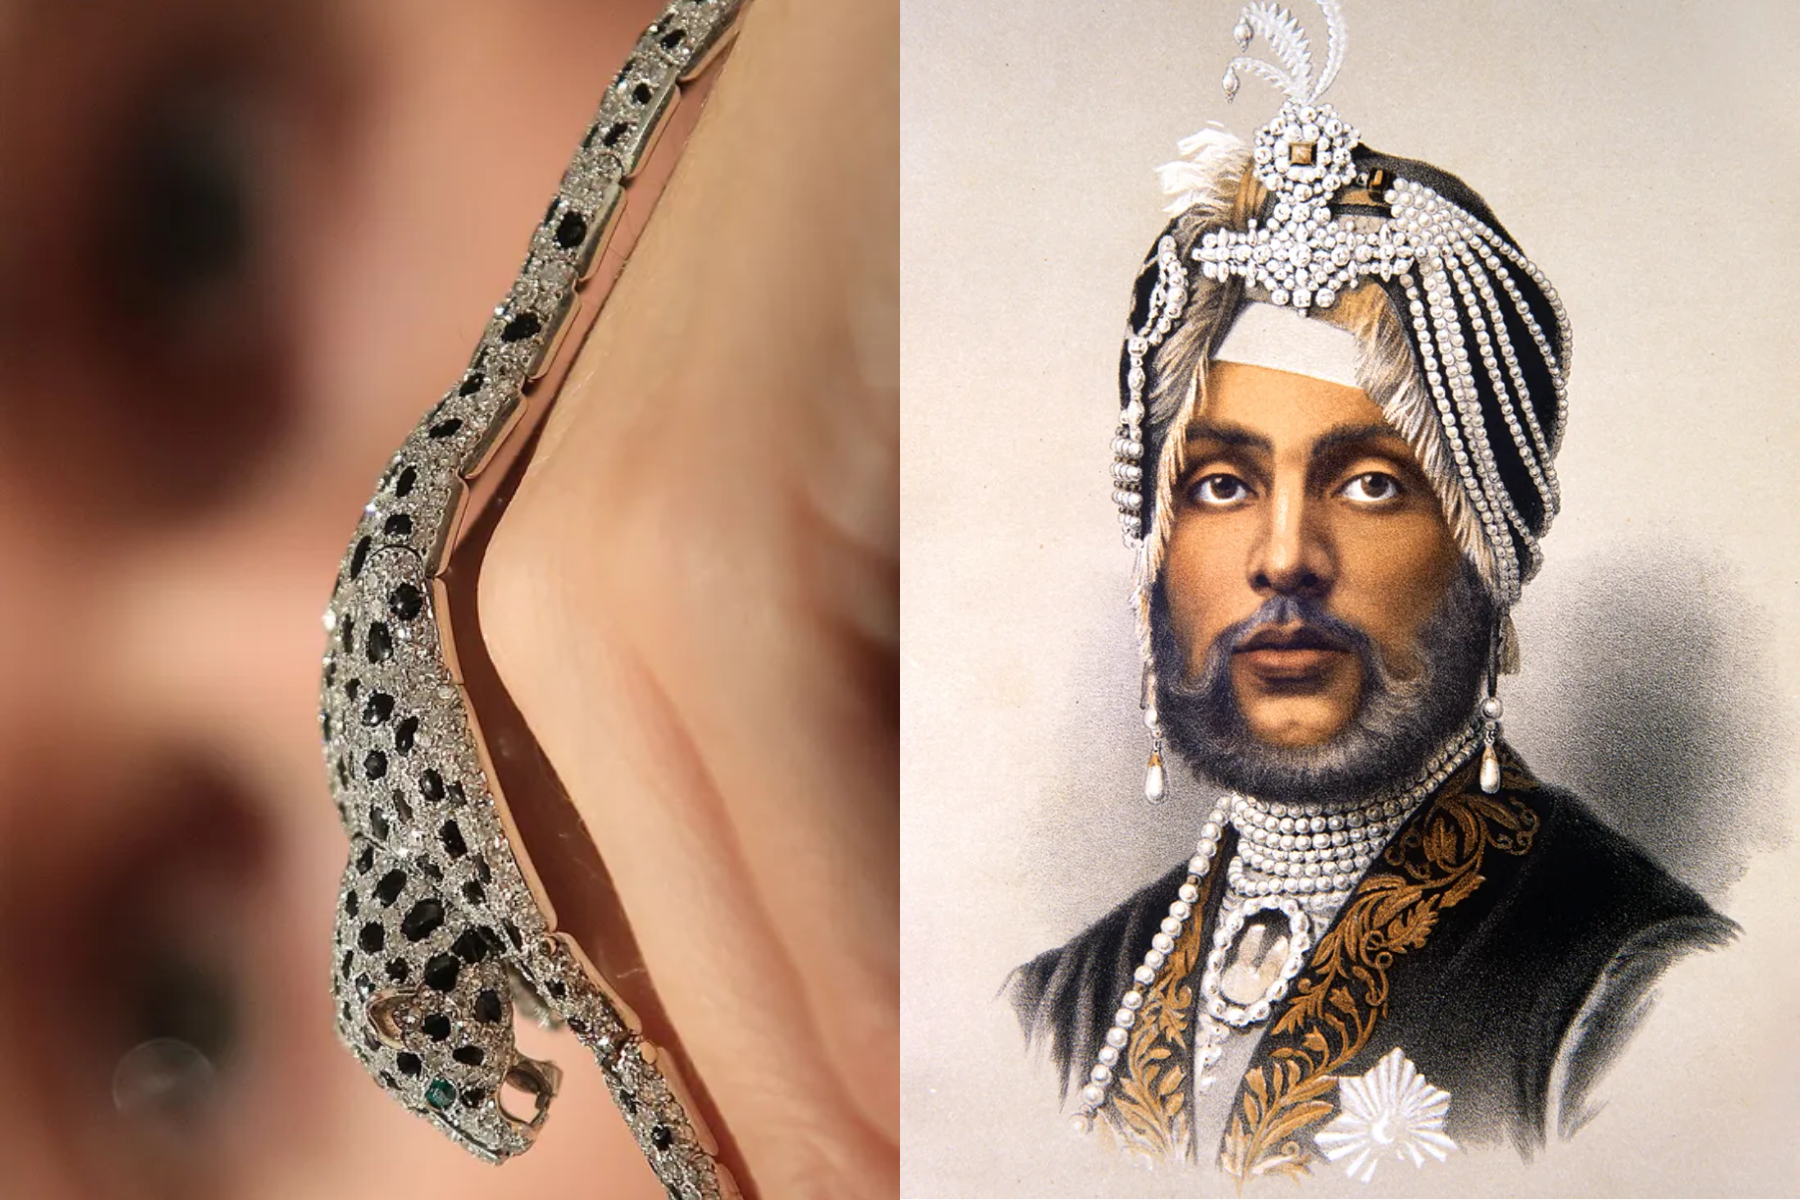 Onyx-and-diamond-embellished Panther bracelet and The famous Koh-i-Noor diamond by the Maharja Duleep Singh